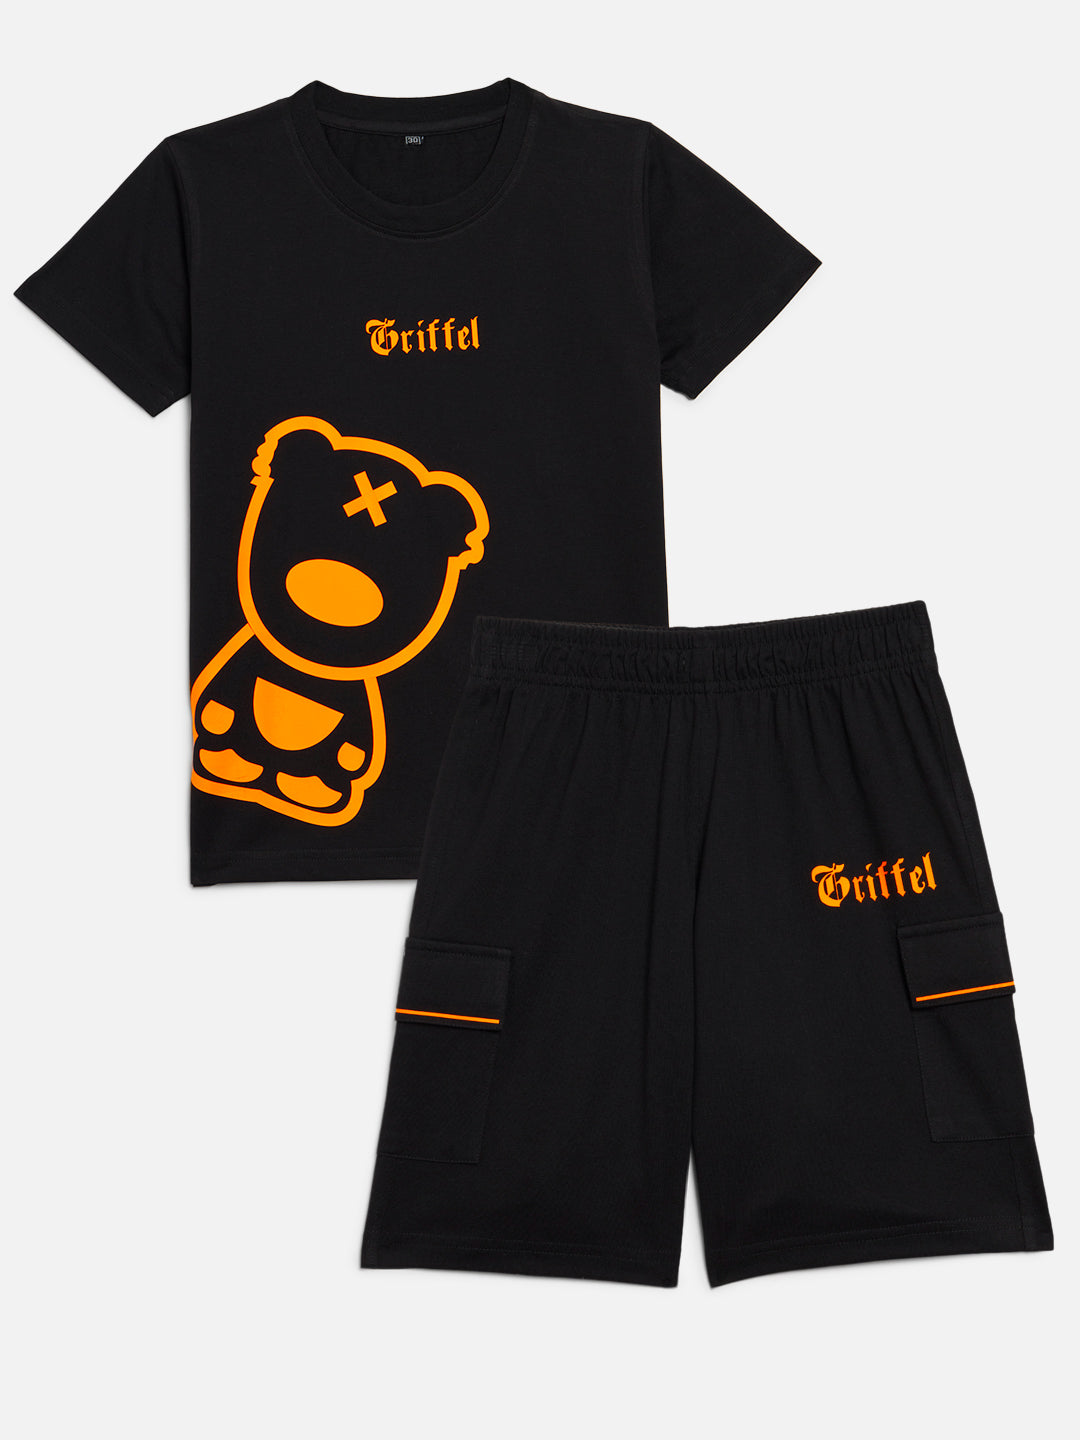 GRIFFEL Boys Kids Black Co-Ord T-shirt and Short Set - griffel